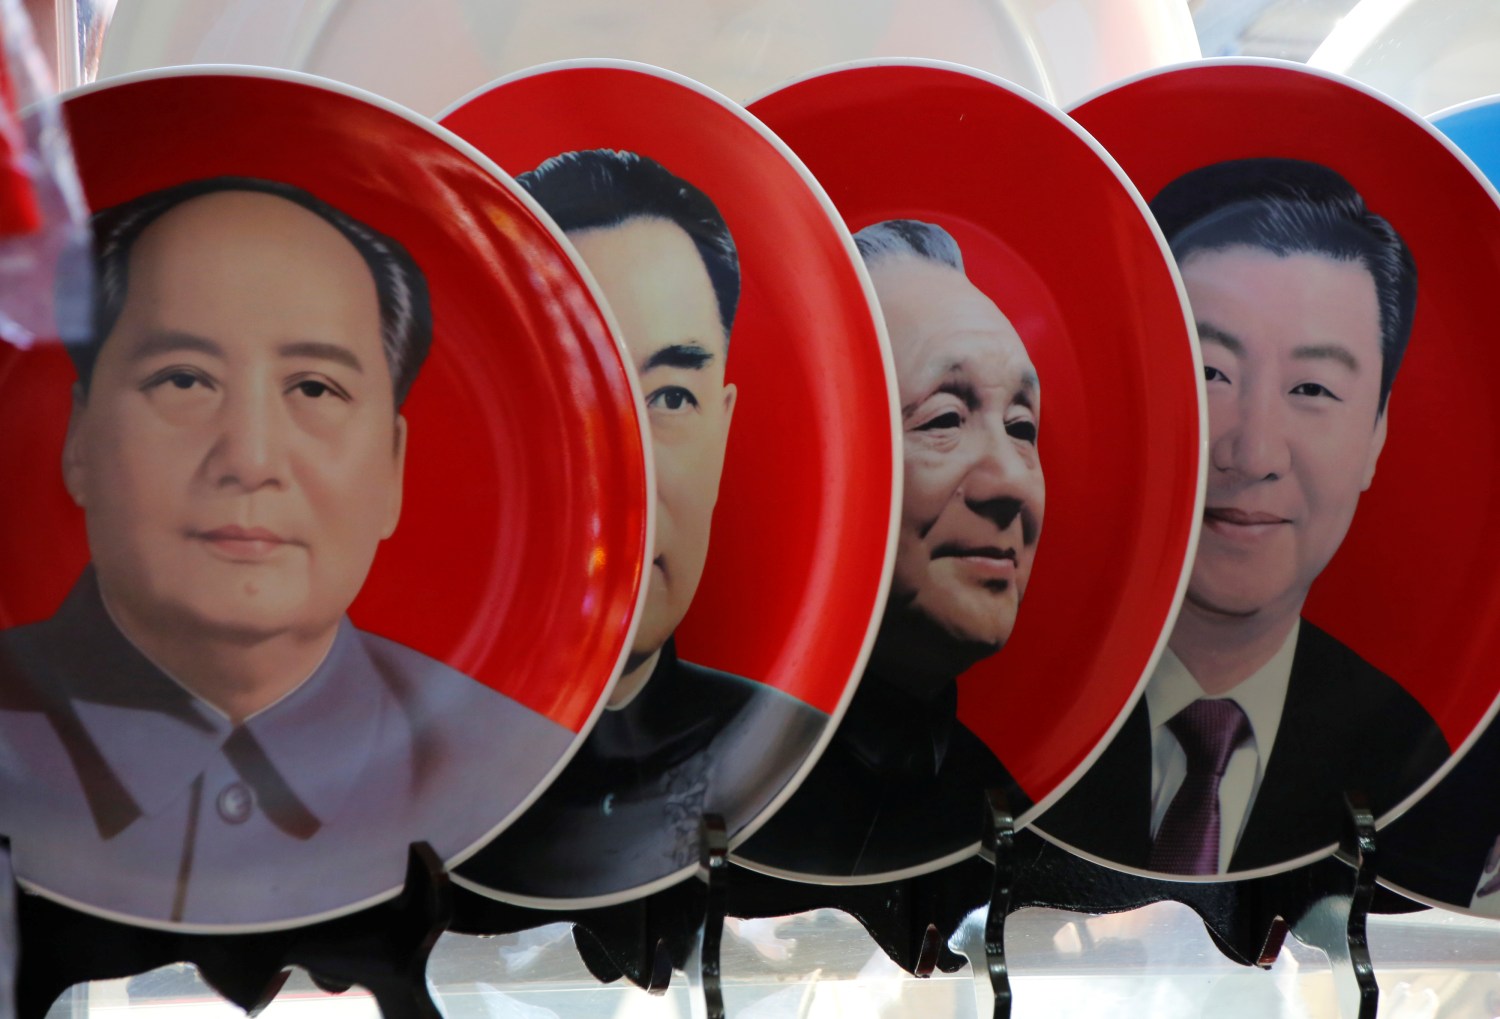 Souvenir plates featuring portraits of current and late Chinese leaders (R-L) Xi Jinping, Deng Xiaoping, Zhou Enlai and Mao Zedong are displayed for sale at a shop next to Tiananmen Square in Beijing, China, March 1, 2018. REUTERS/Jason Lee - RC1F3D851180